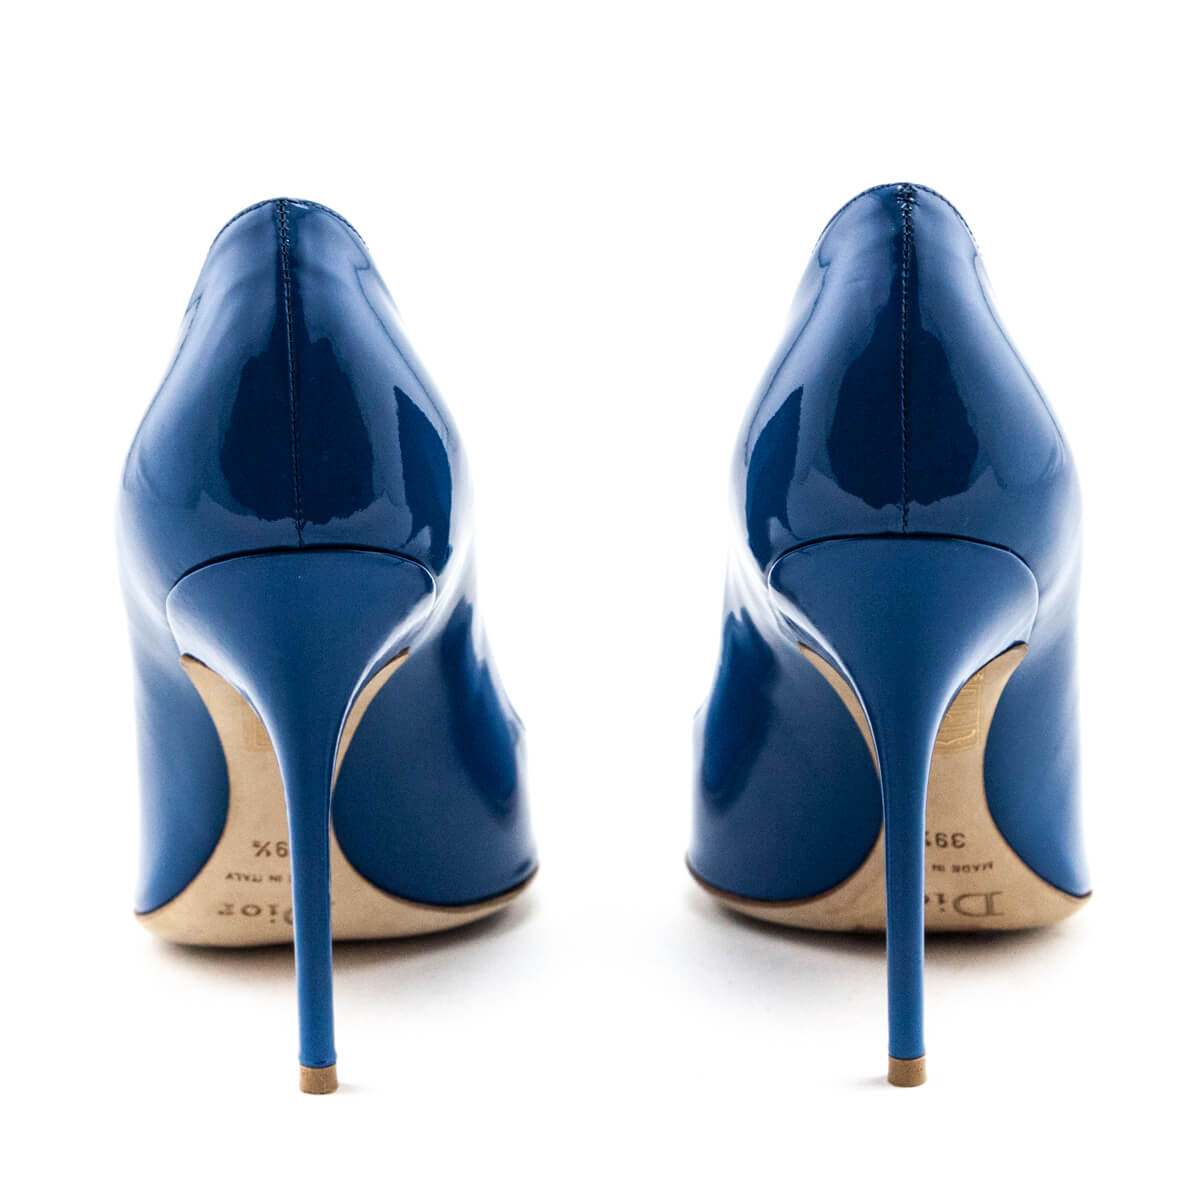 Dior Blue Patent Cherie Pointed Toe Pumps Size US 9.5 | EU 39.5 - Love that Bag etc - Preowned Authentic Designer Handbags & Preloved Fashions